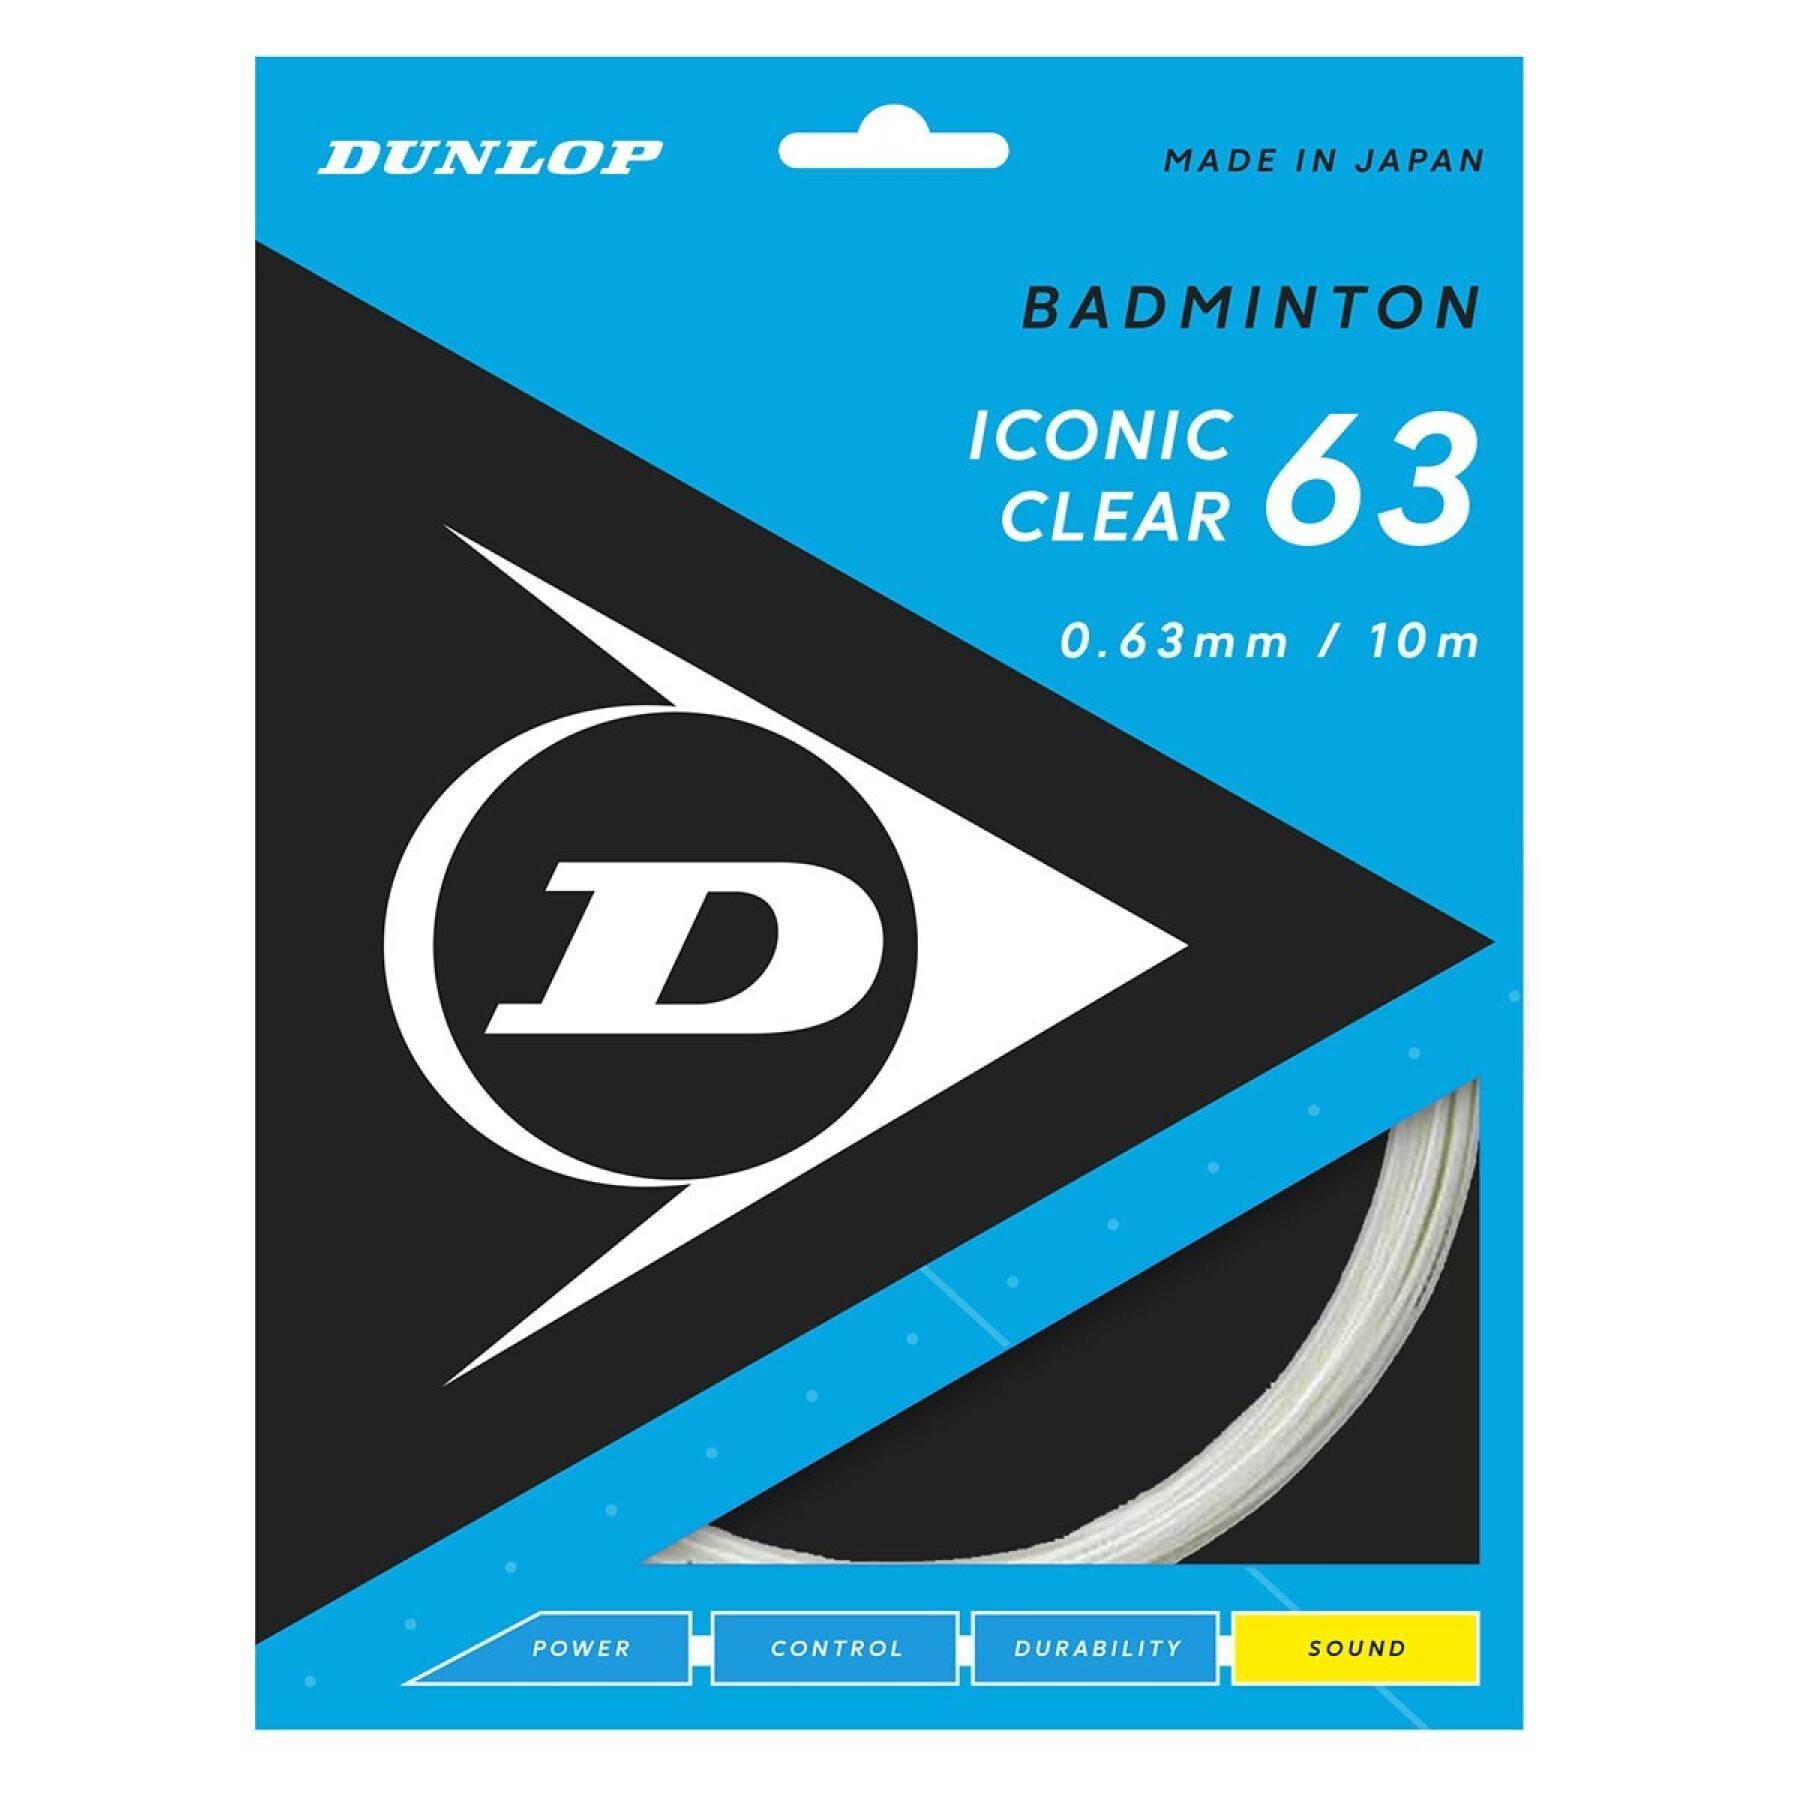 Badminton strings Dunlop Iconic Clear 10 m